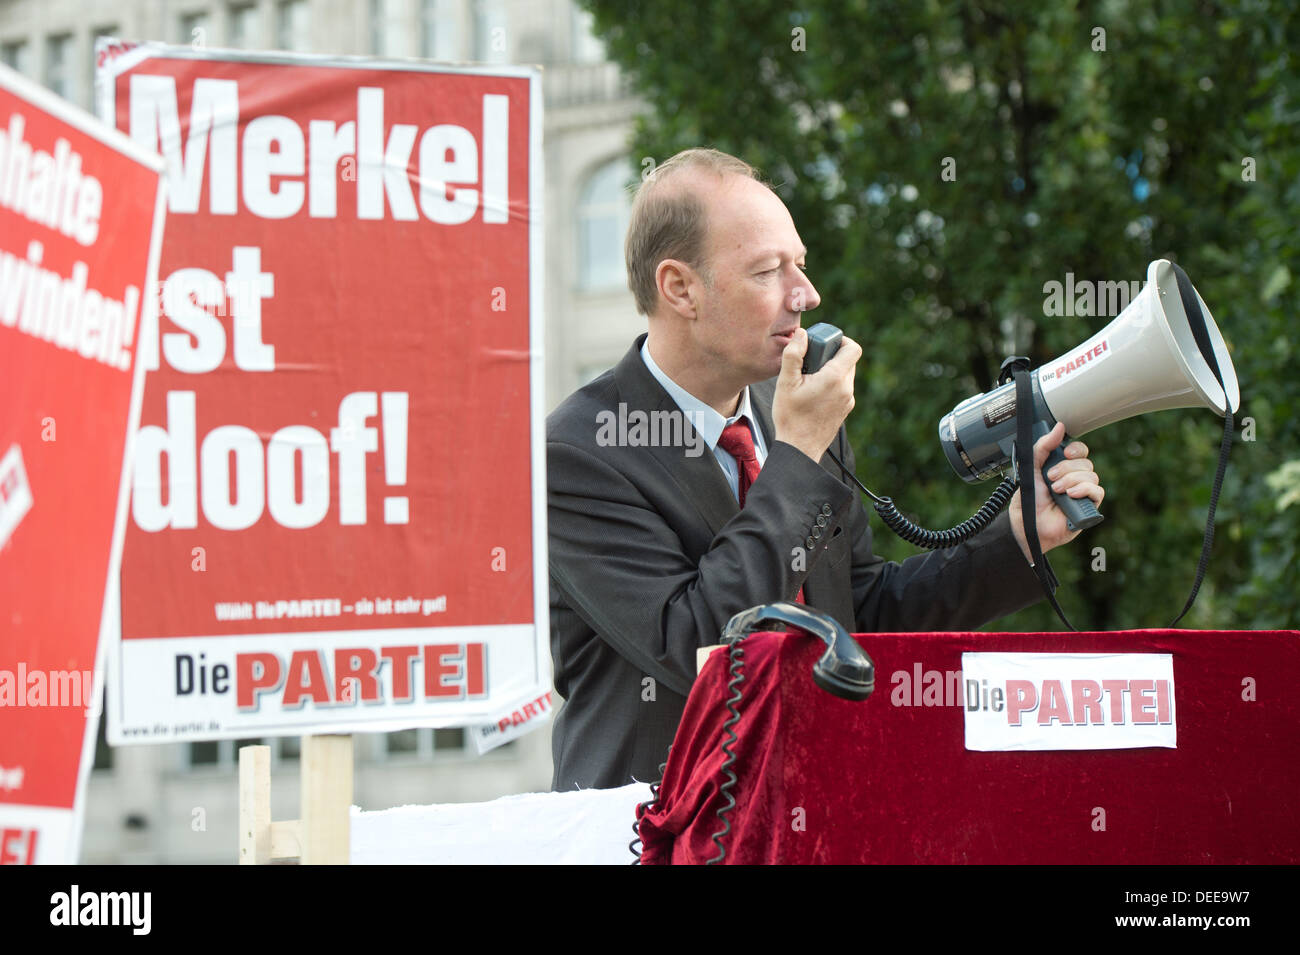 Martin Sonneborn, party leader of Die PARTEI, speaks during a poster campaign of Die PARTEI in Berlin, Germany, 17 September 2013. Photo: MAURIZIO GAMBARINI/dpa Stock Photo